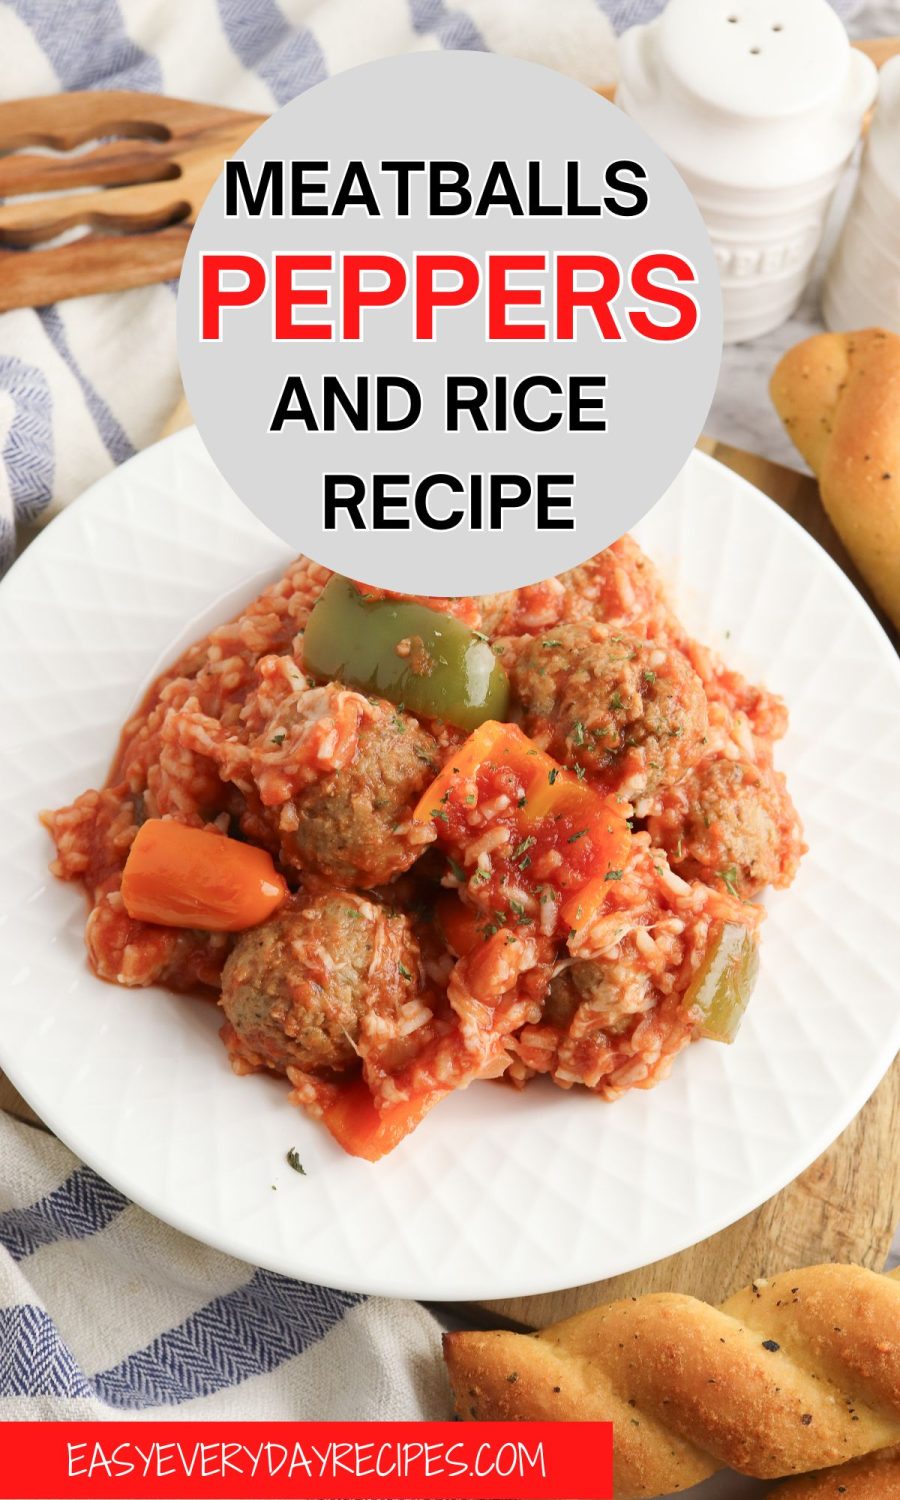 Meatballs peppers and rice recipe.